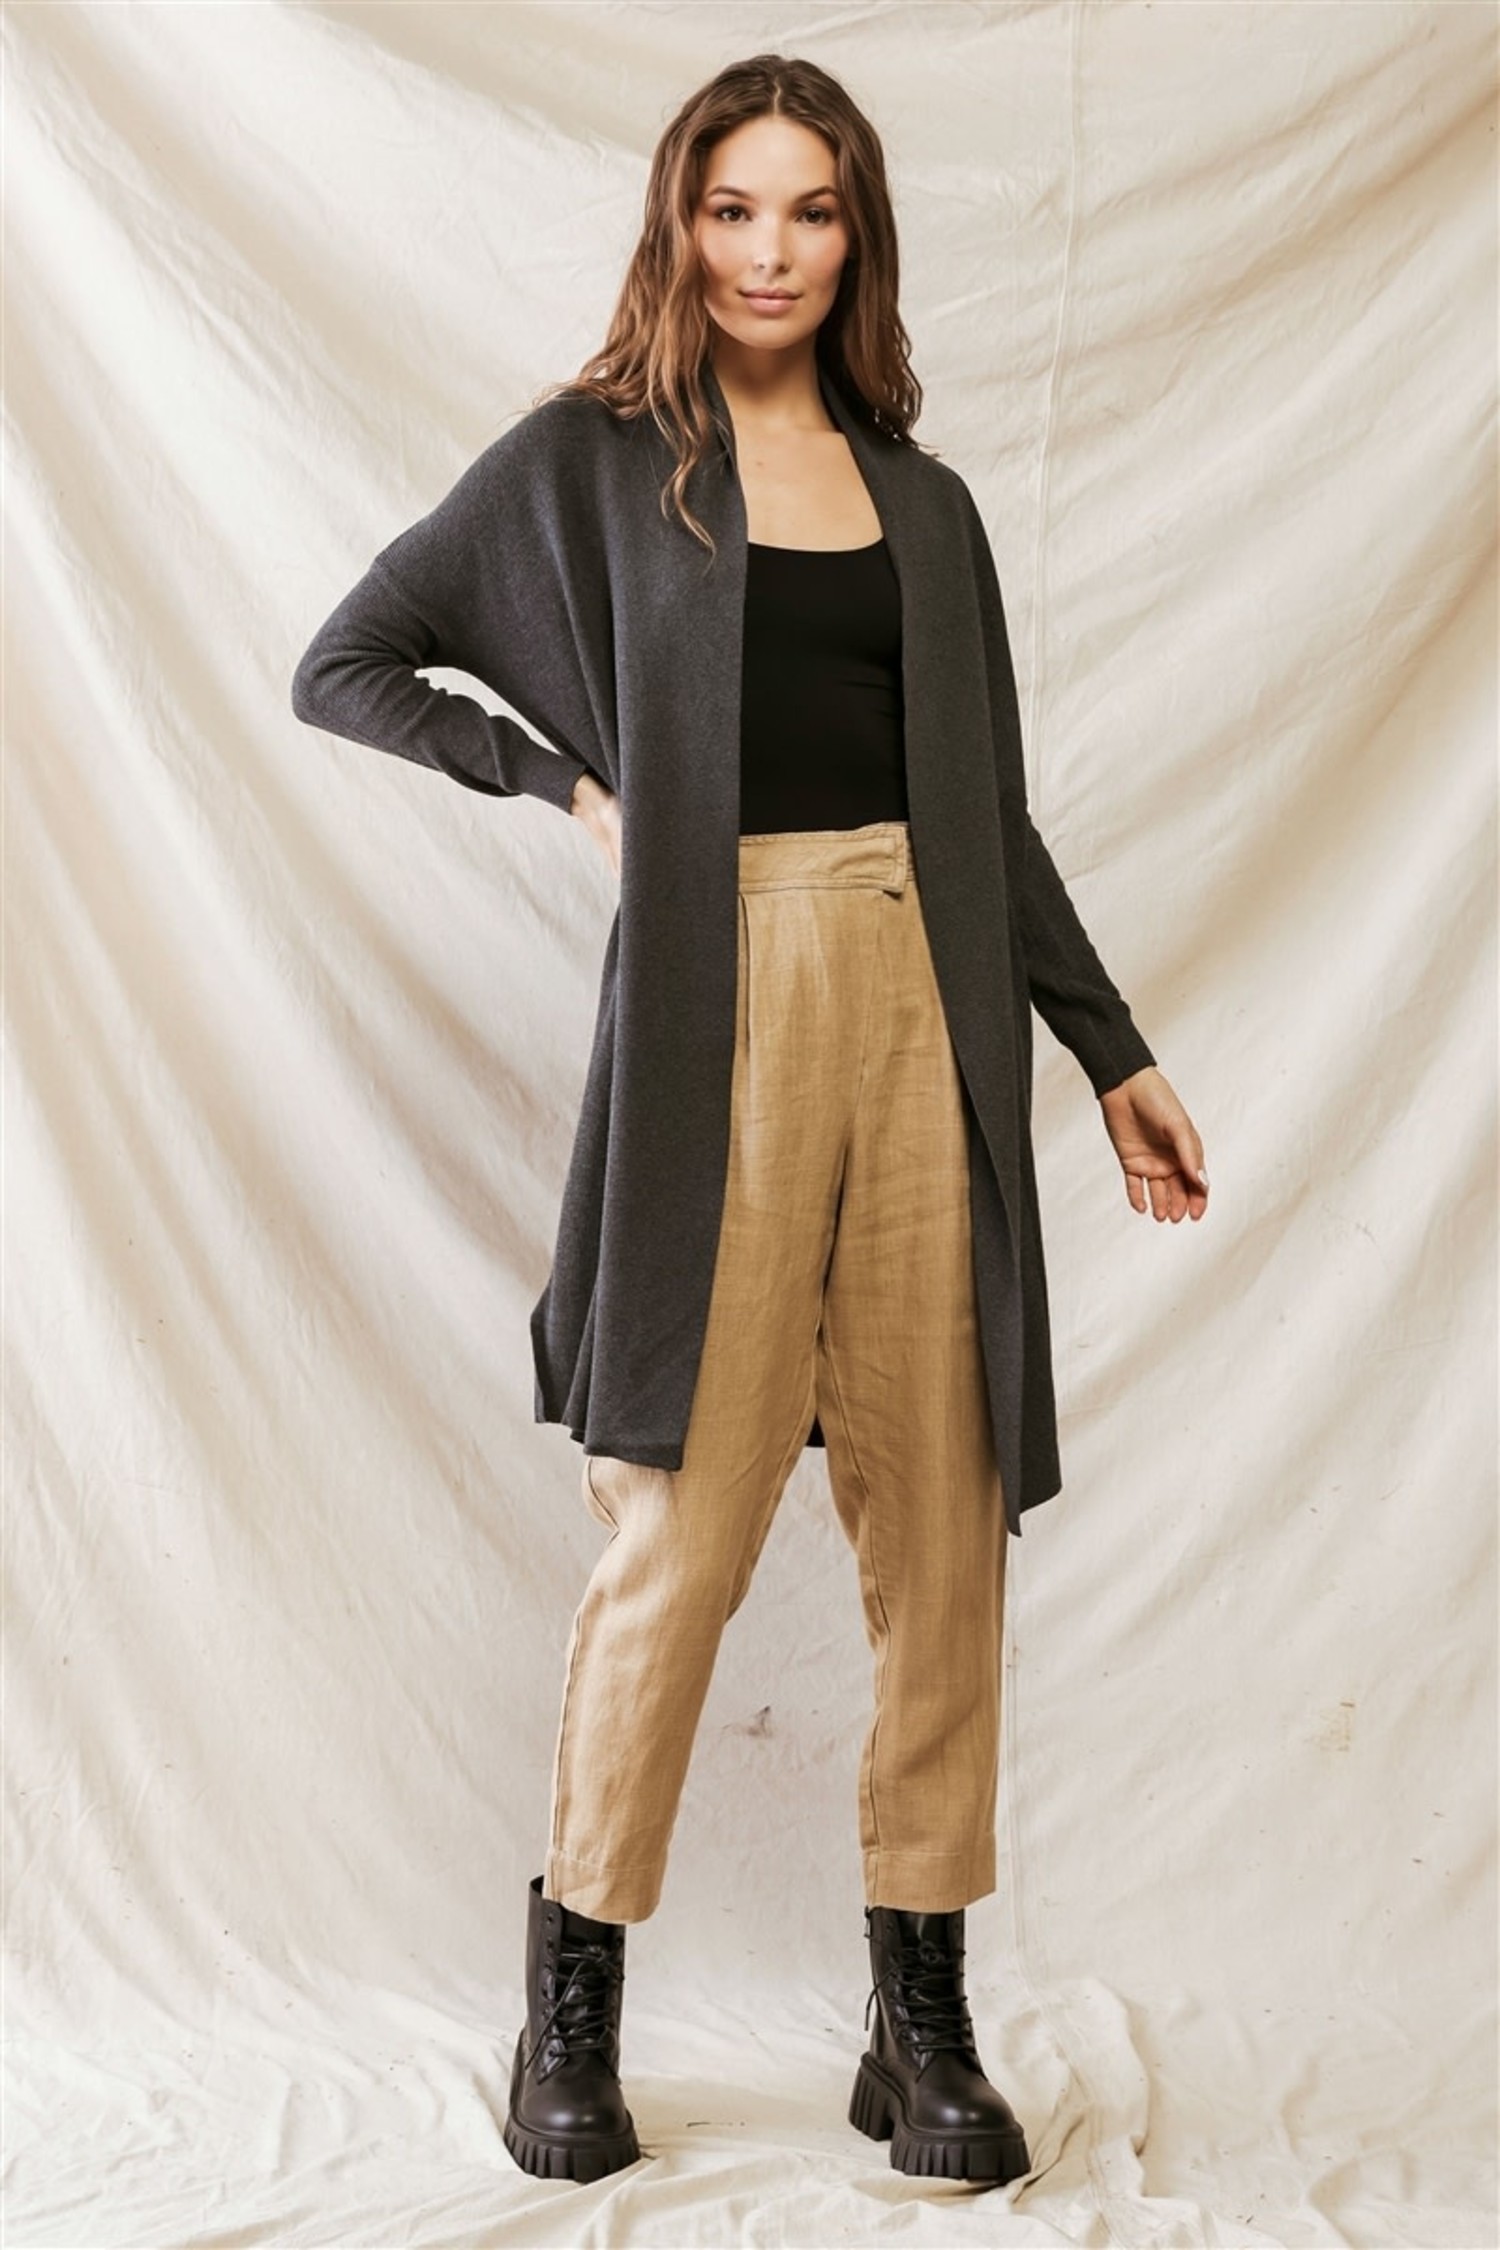 Cotton Blend Long Sleeve Open Front Cardigan